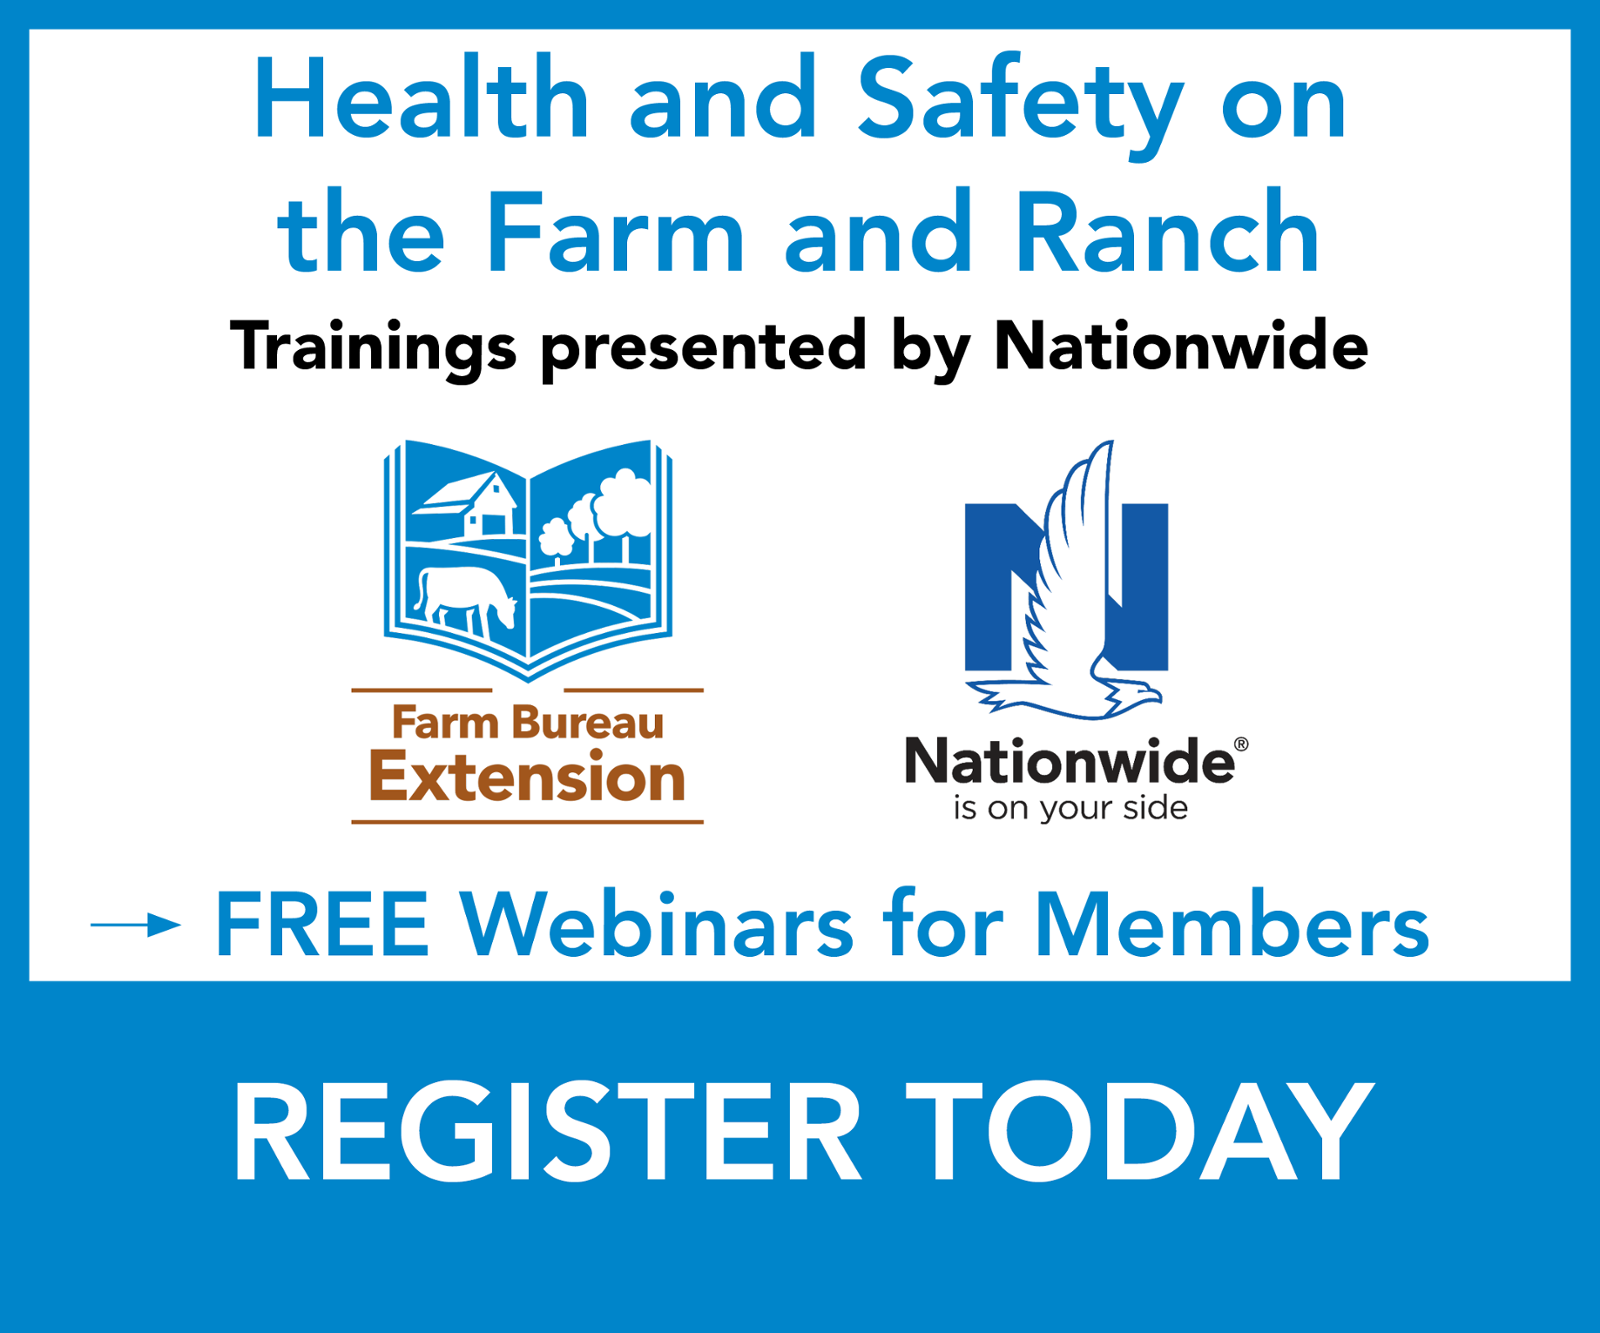 Health and Safety on the Farm and Ranch